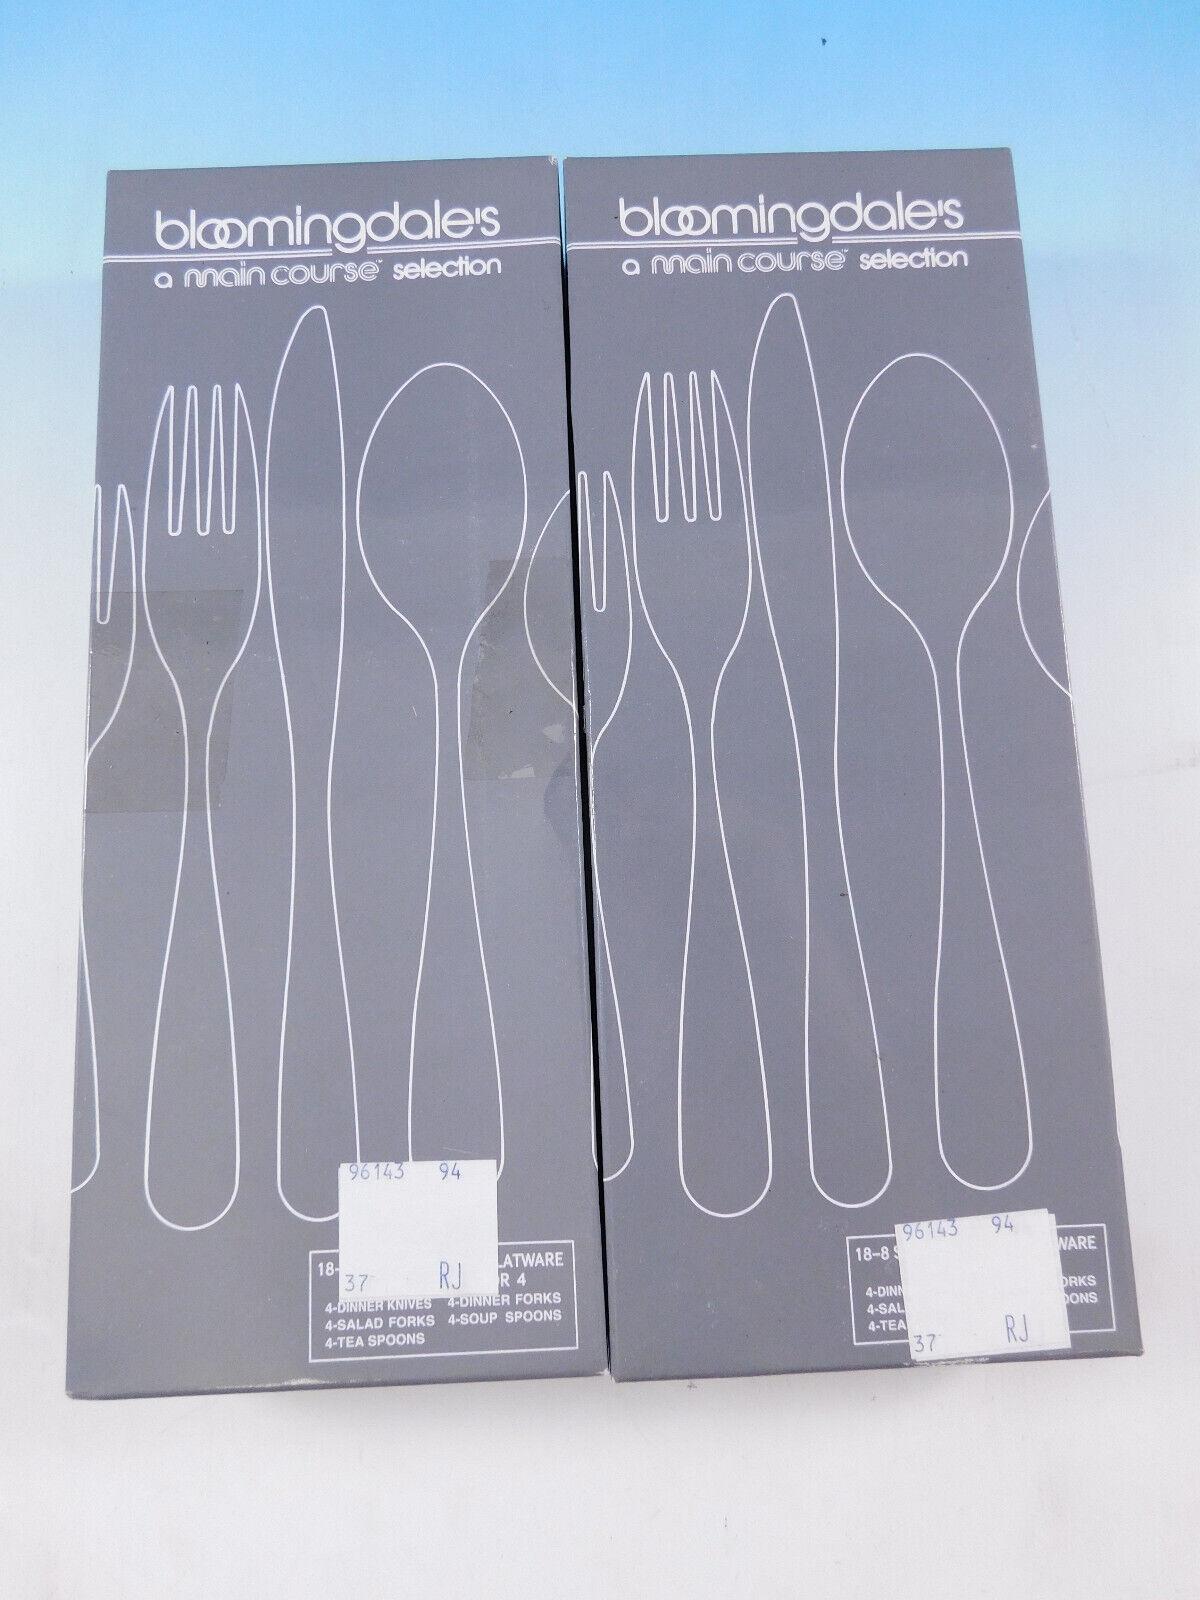 Wave Twist by The Main Course

Modern Wave Twist by The Main Course (Japan) glossy finish Stainless Steel Flatware set - 40 pieces. This set includes:
8 Dinner Knives, 9 1/4